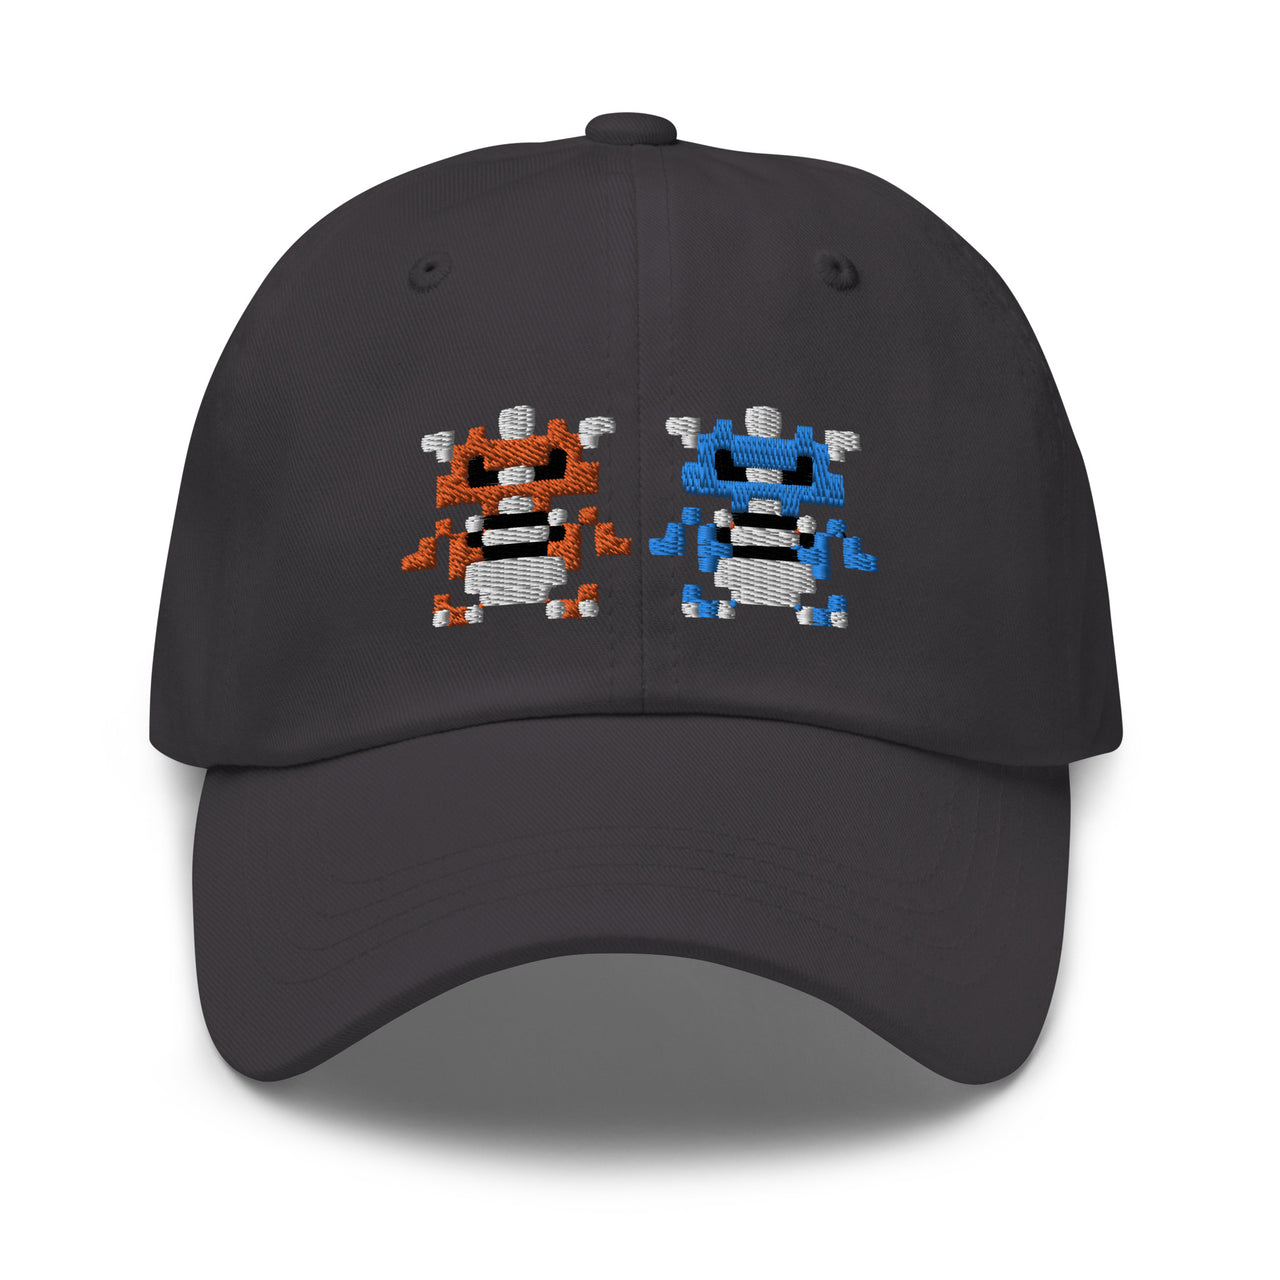 Two Monsters Dad hat